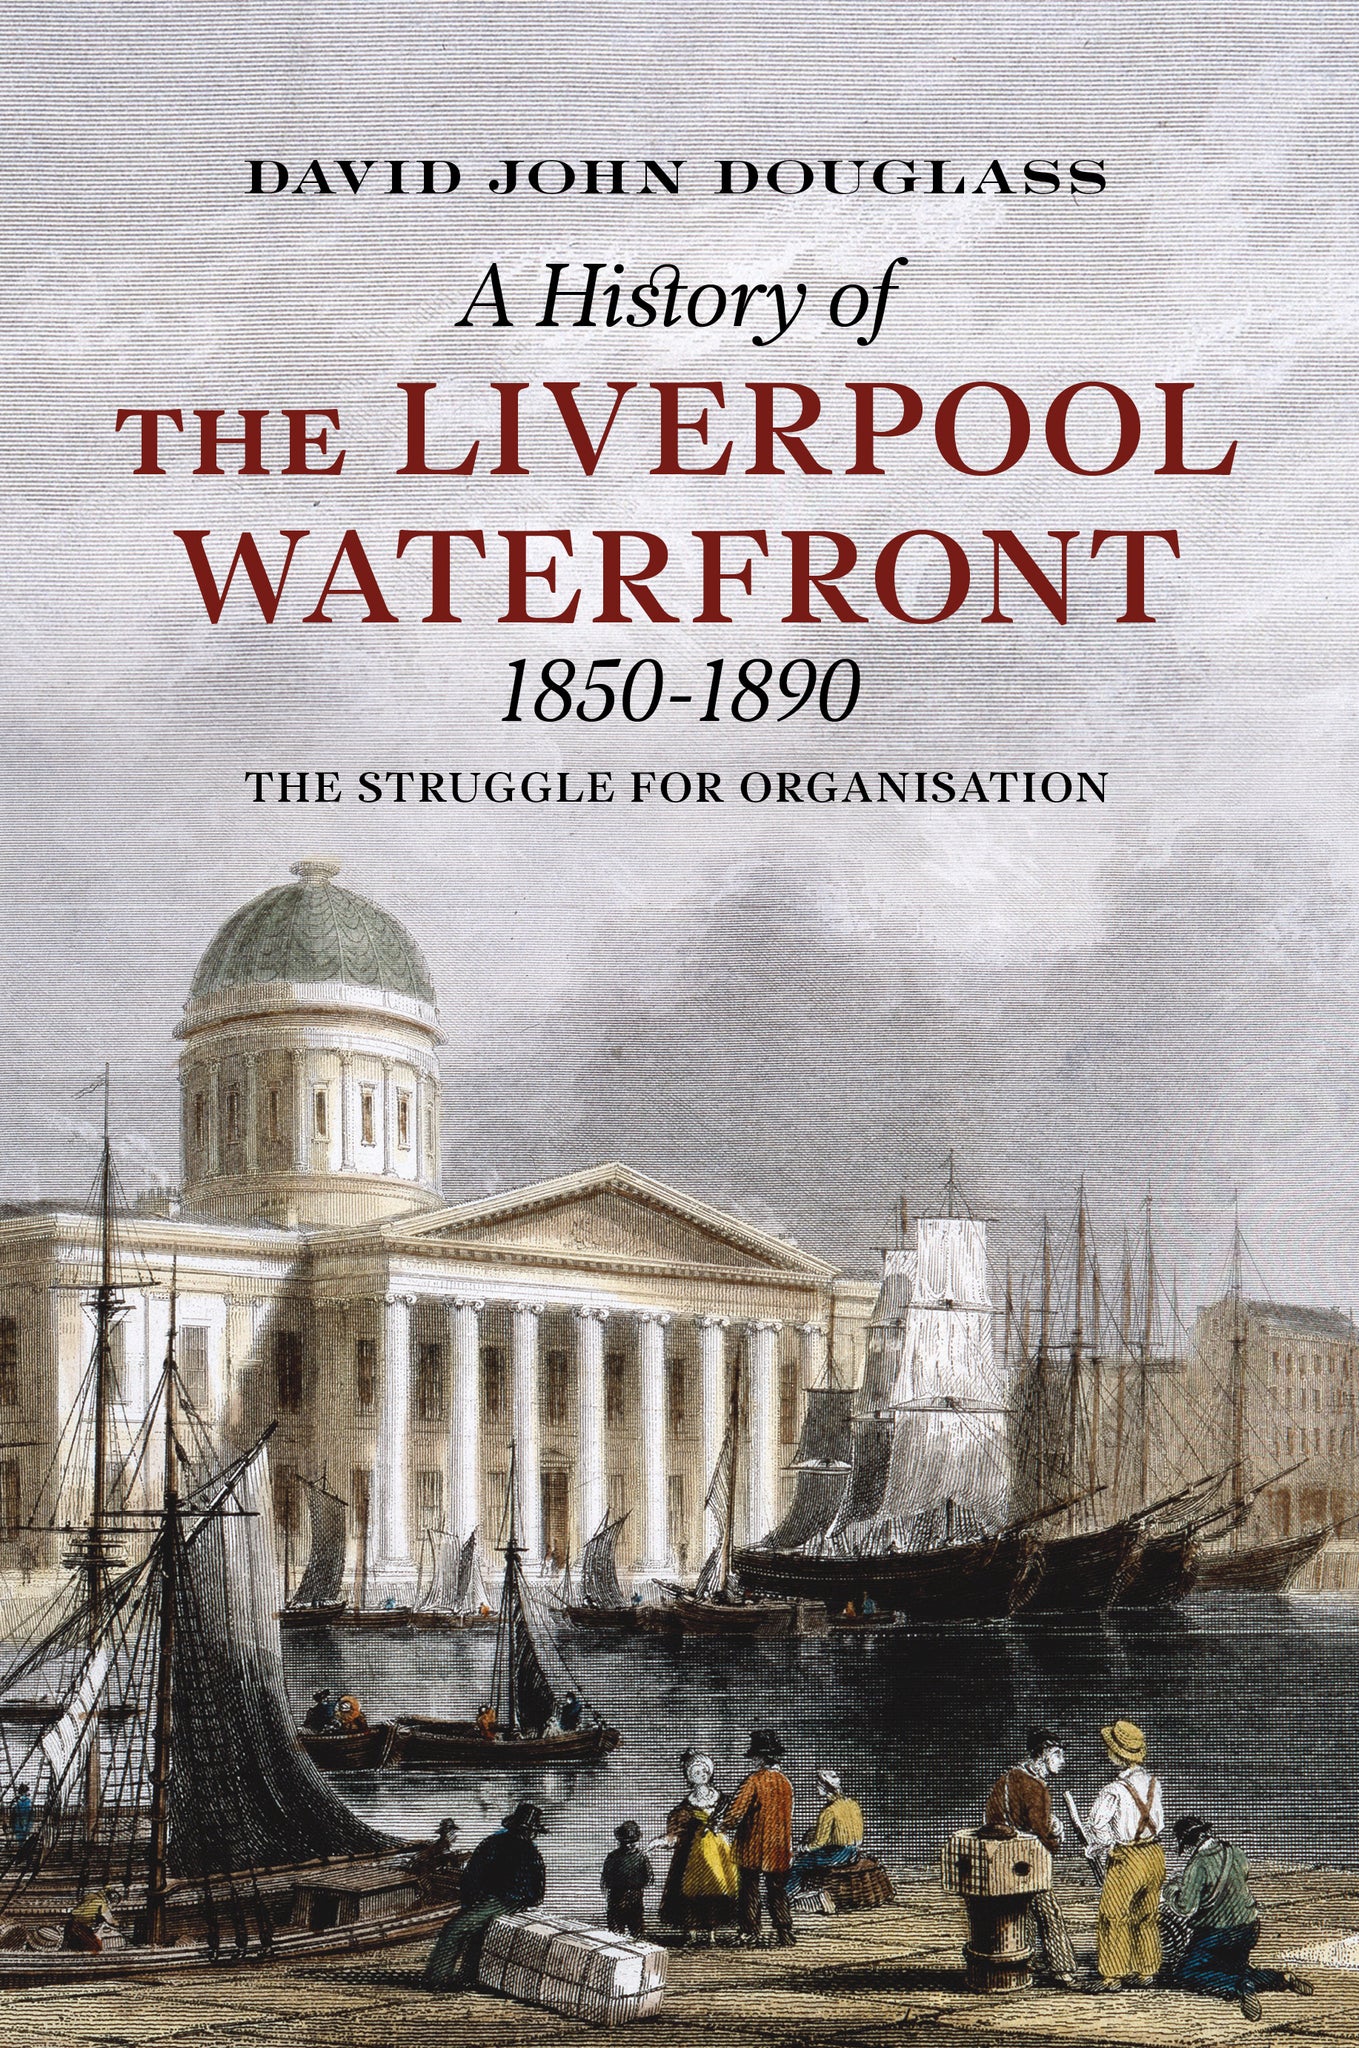 A History of the Liverpool Waterfront 1850-1890: The Struggle for Organisation - available from Fonthill Media